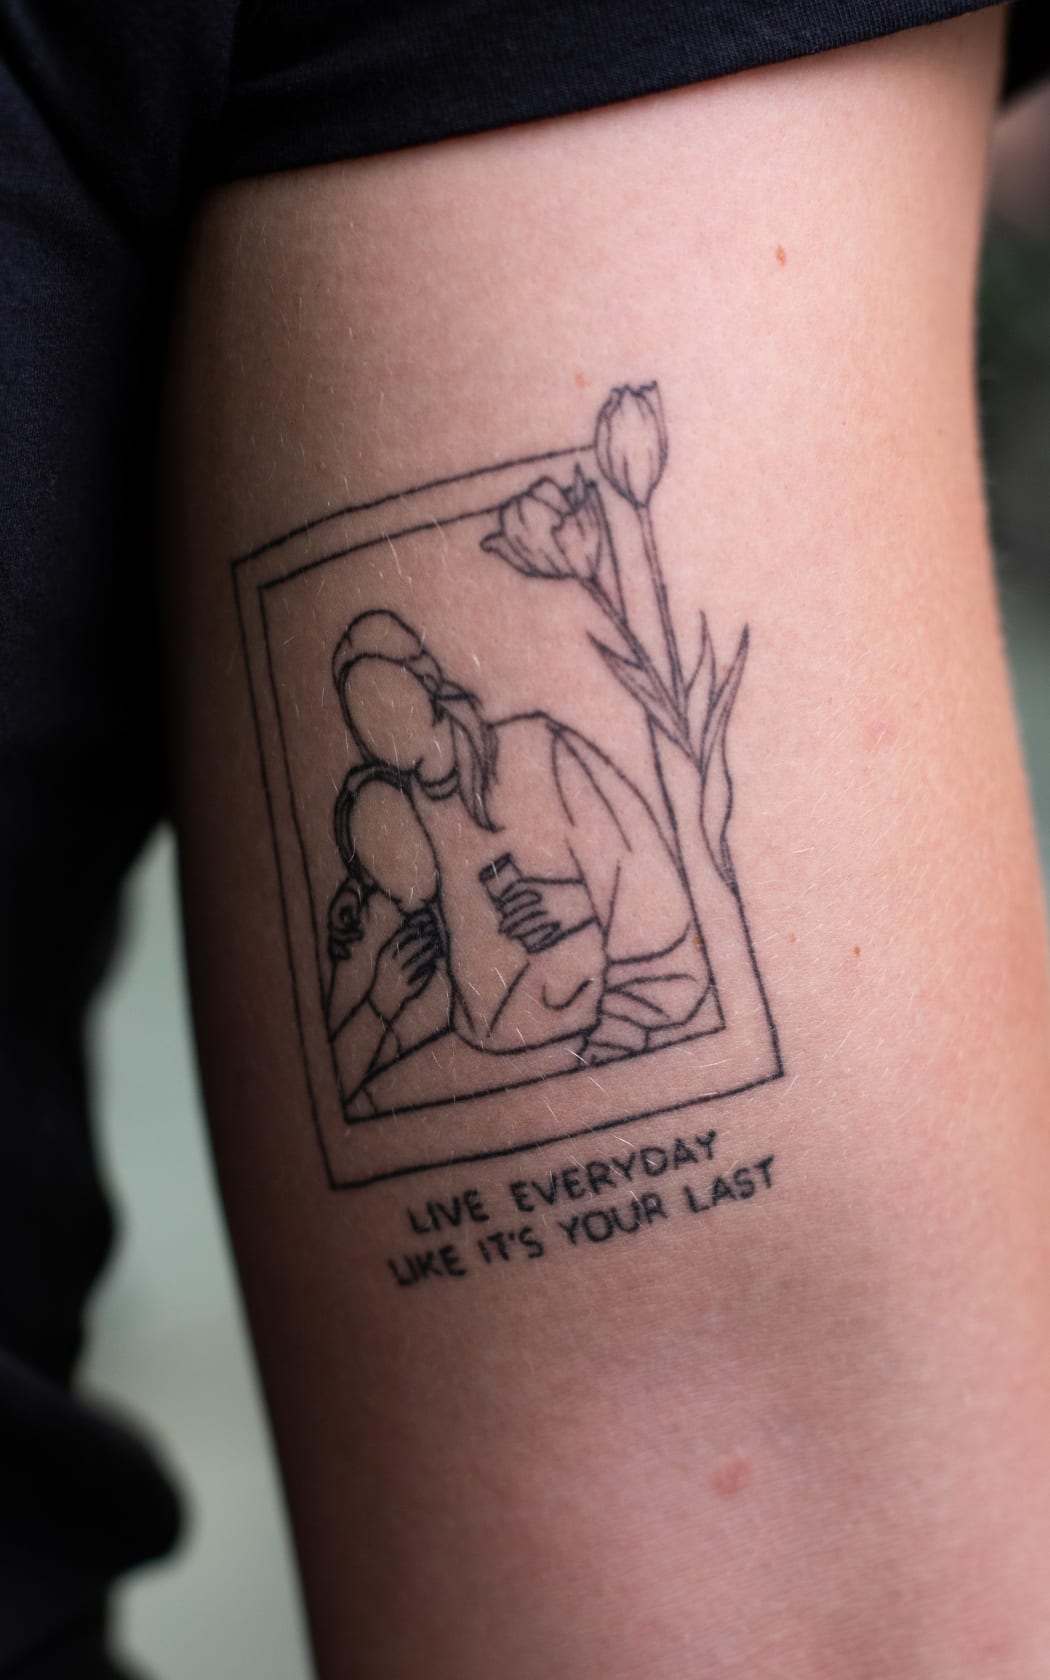 Shaane Fulton has a tattoo in tribute to her best friend Olivia Podmore